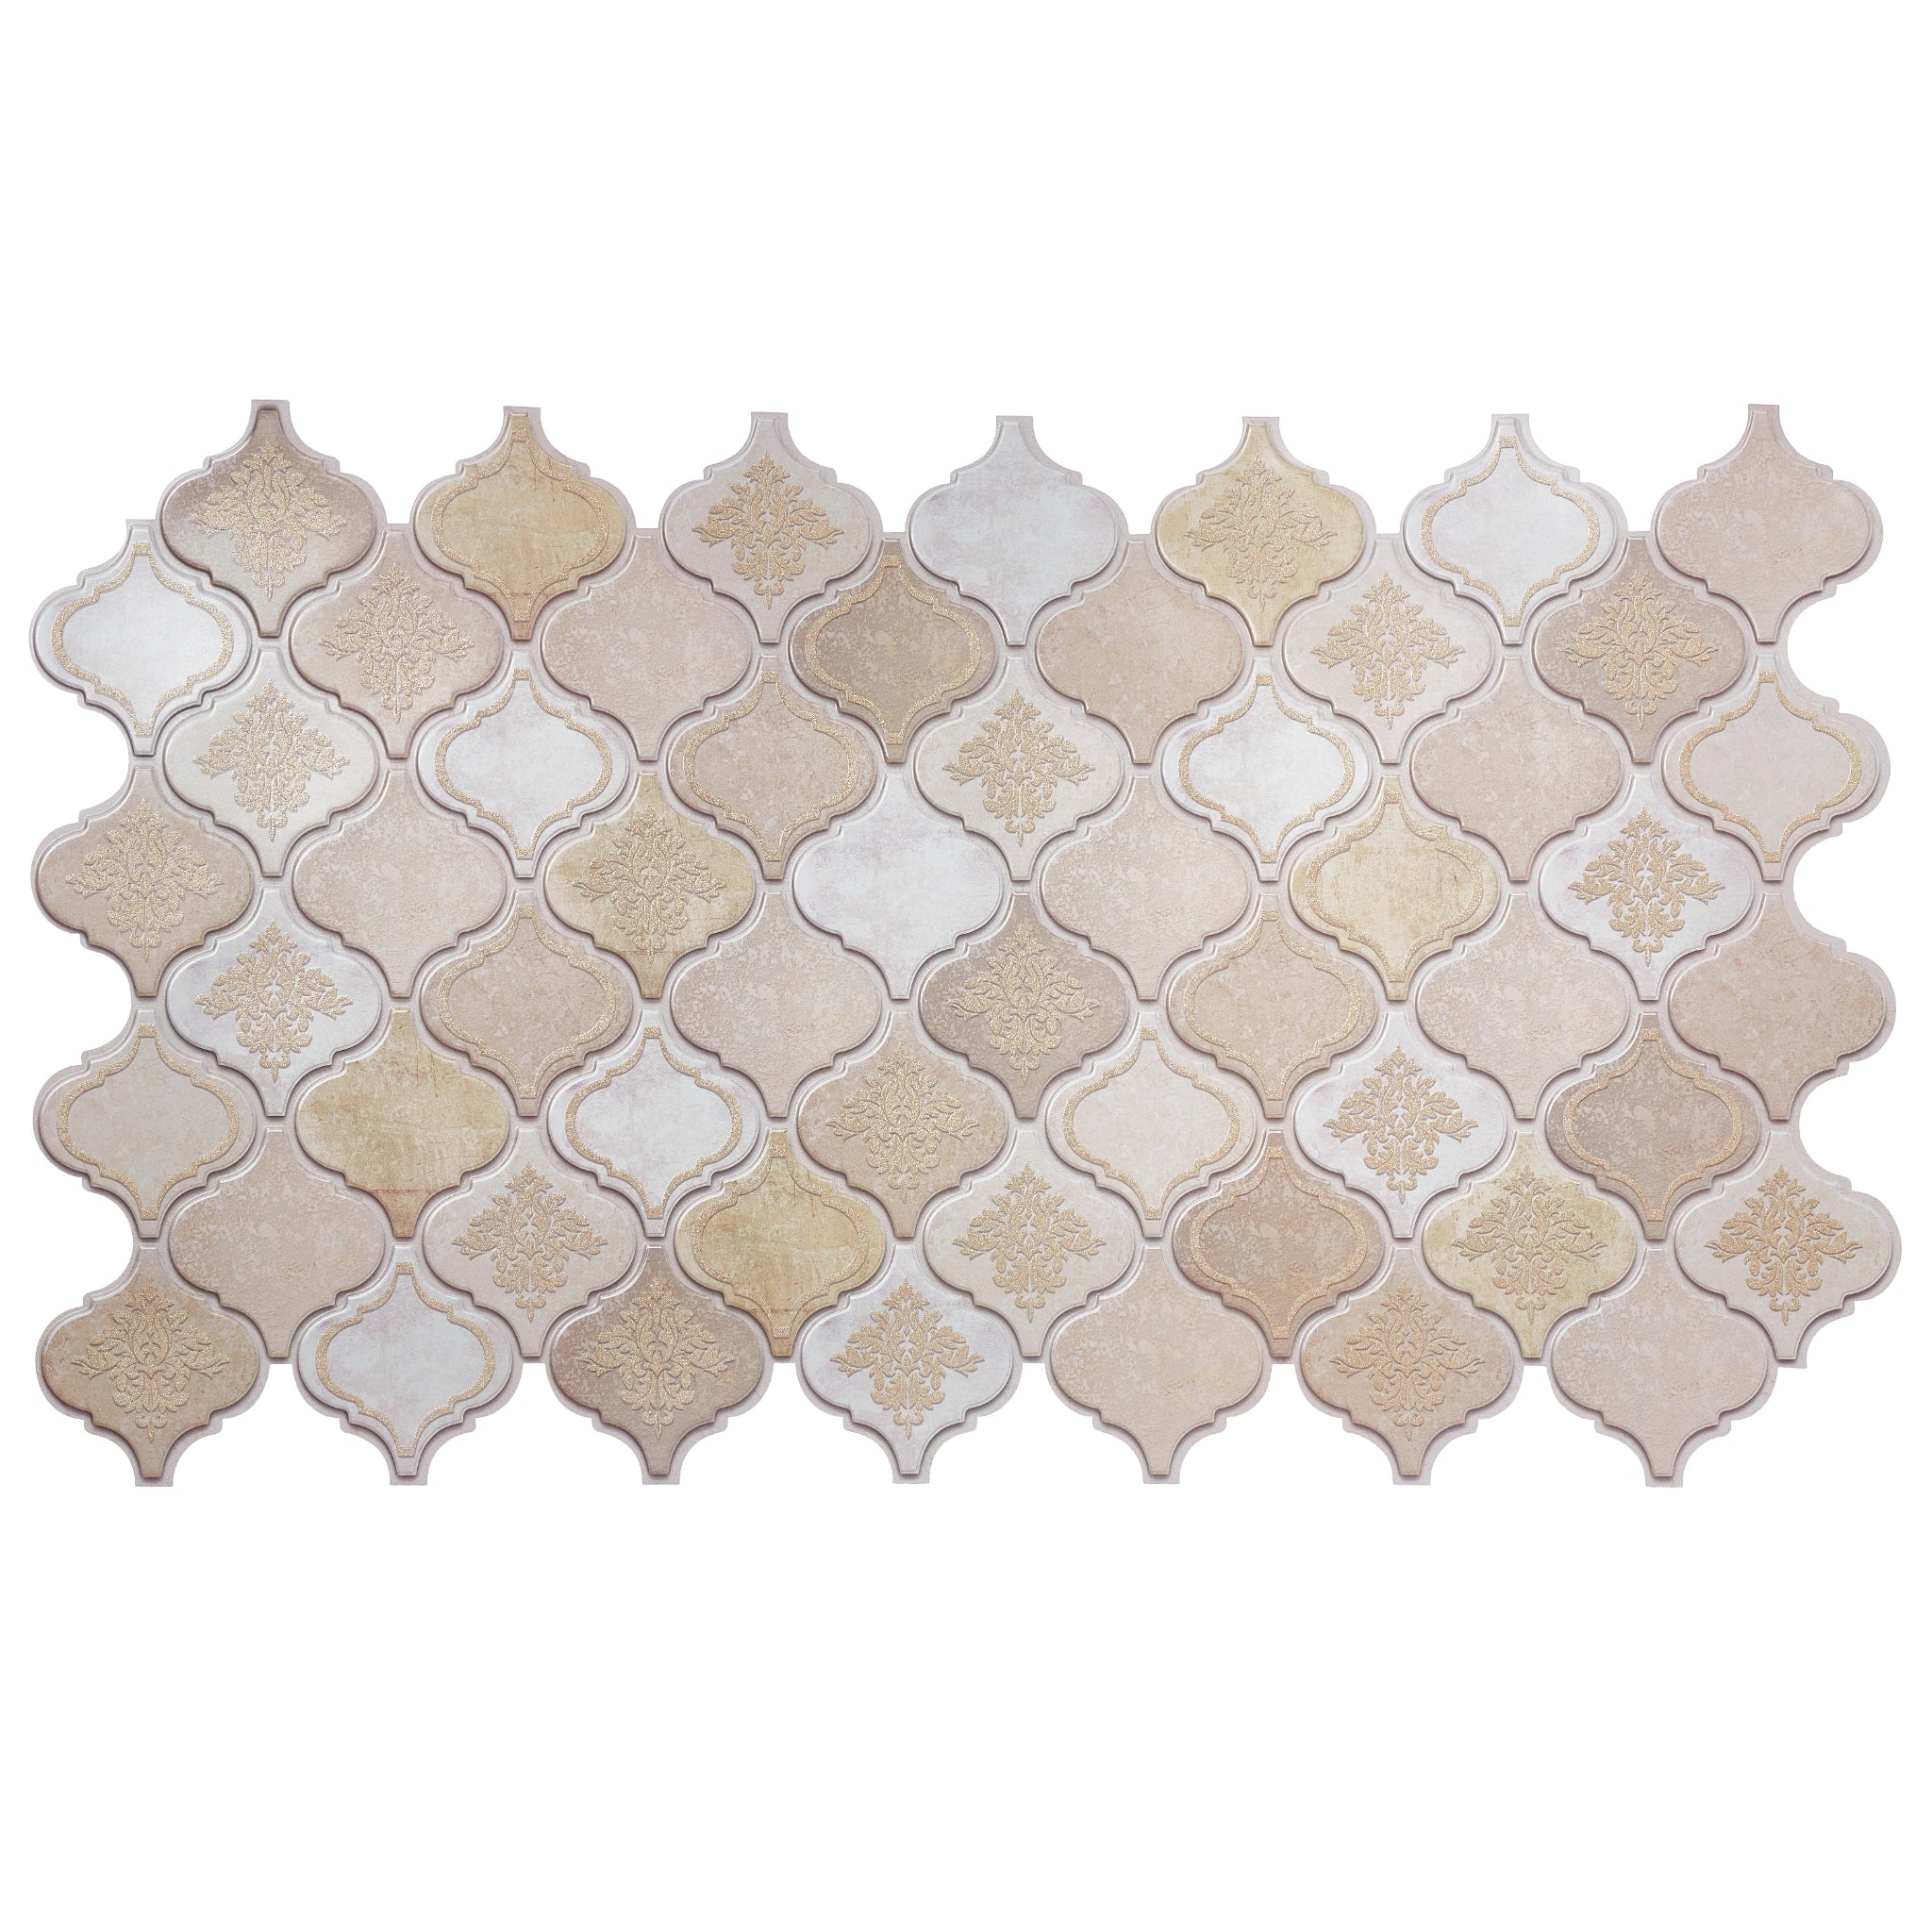 Beige wall panel with geometric patterns, close-up view